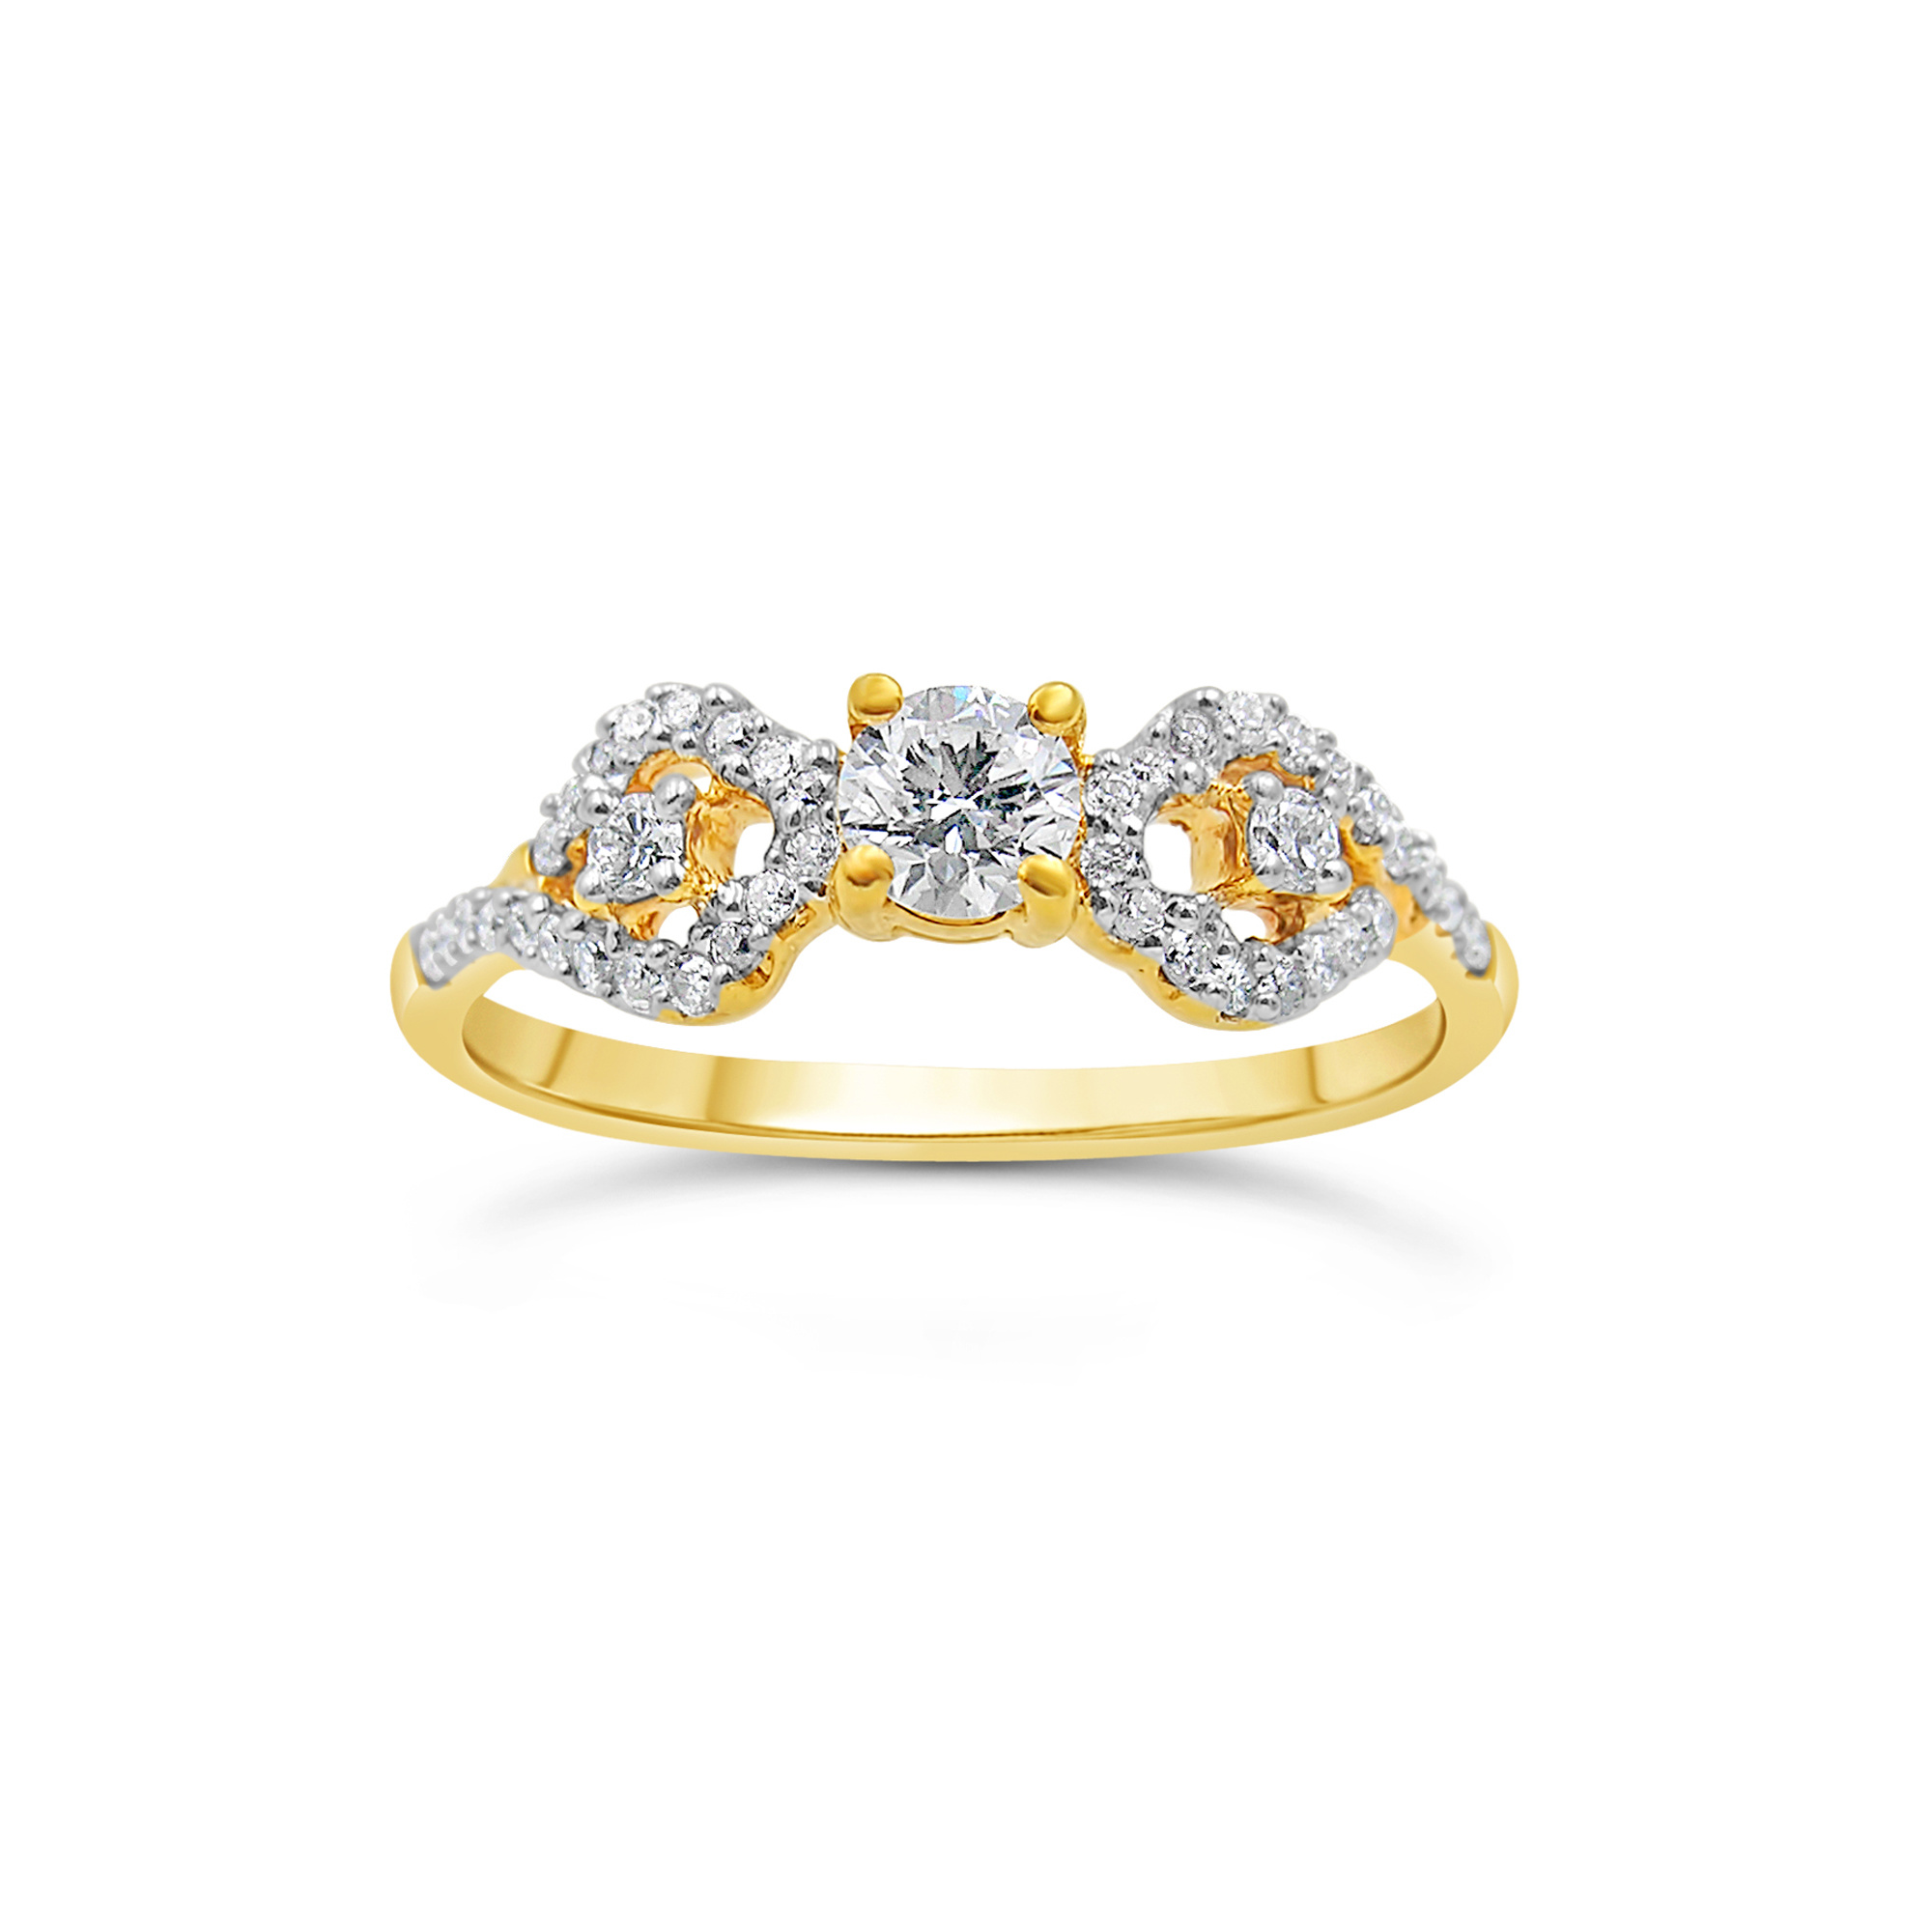 18kt yellow gold engagement ring with 0.49 ct diamonds